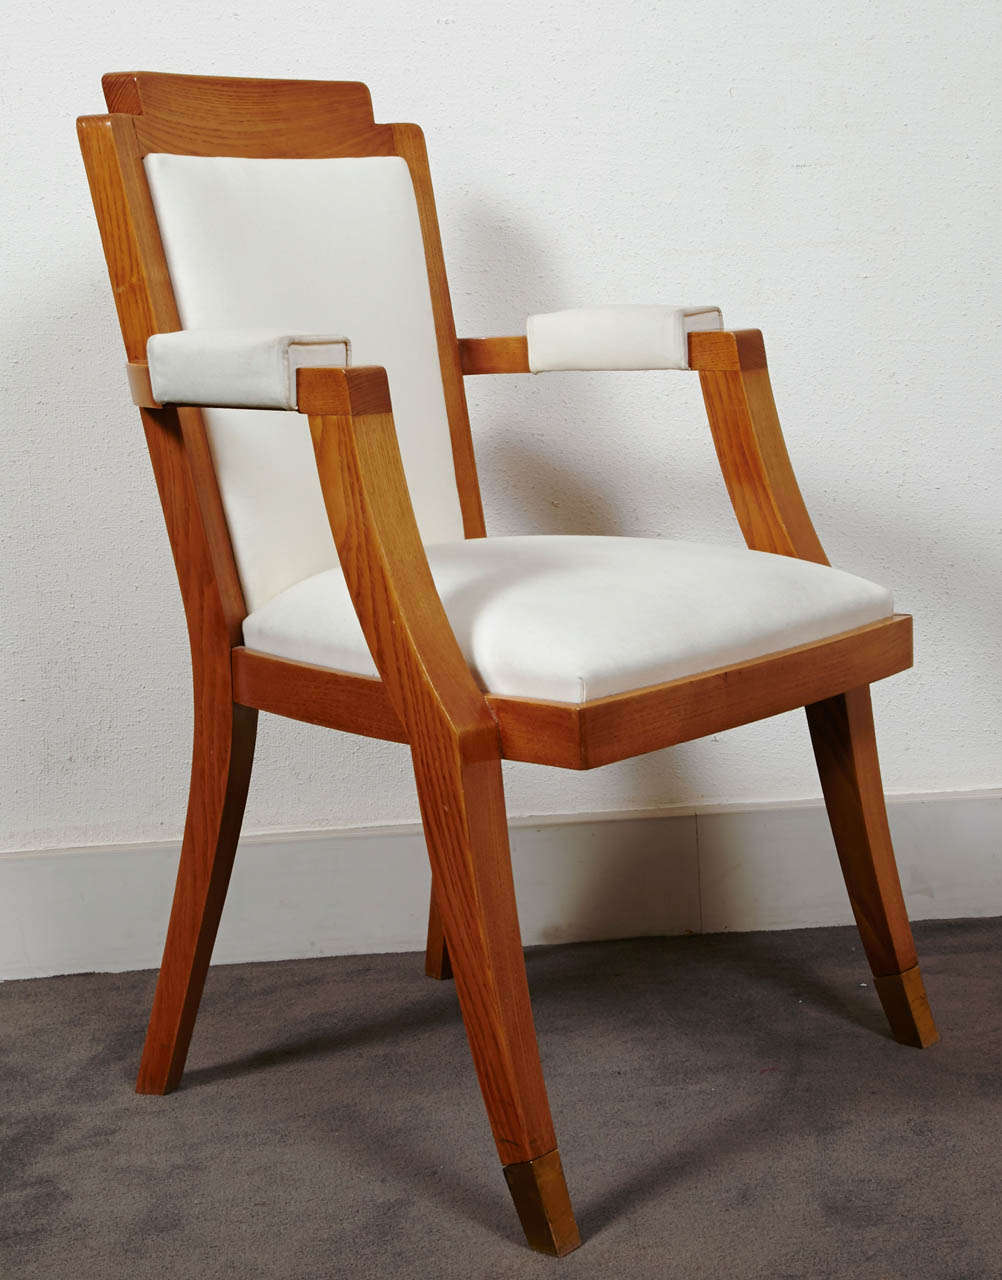 Pair of Beech Tree Armchairs by G. Darbois-Gaudin, 1949 For Sale 2